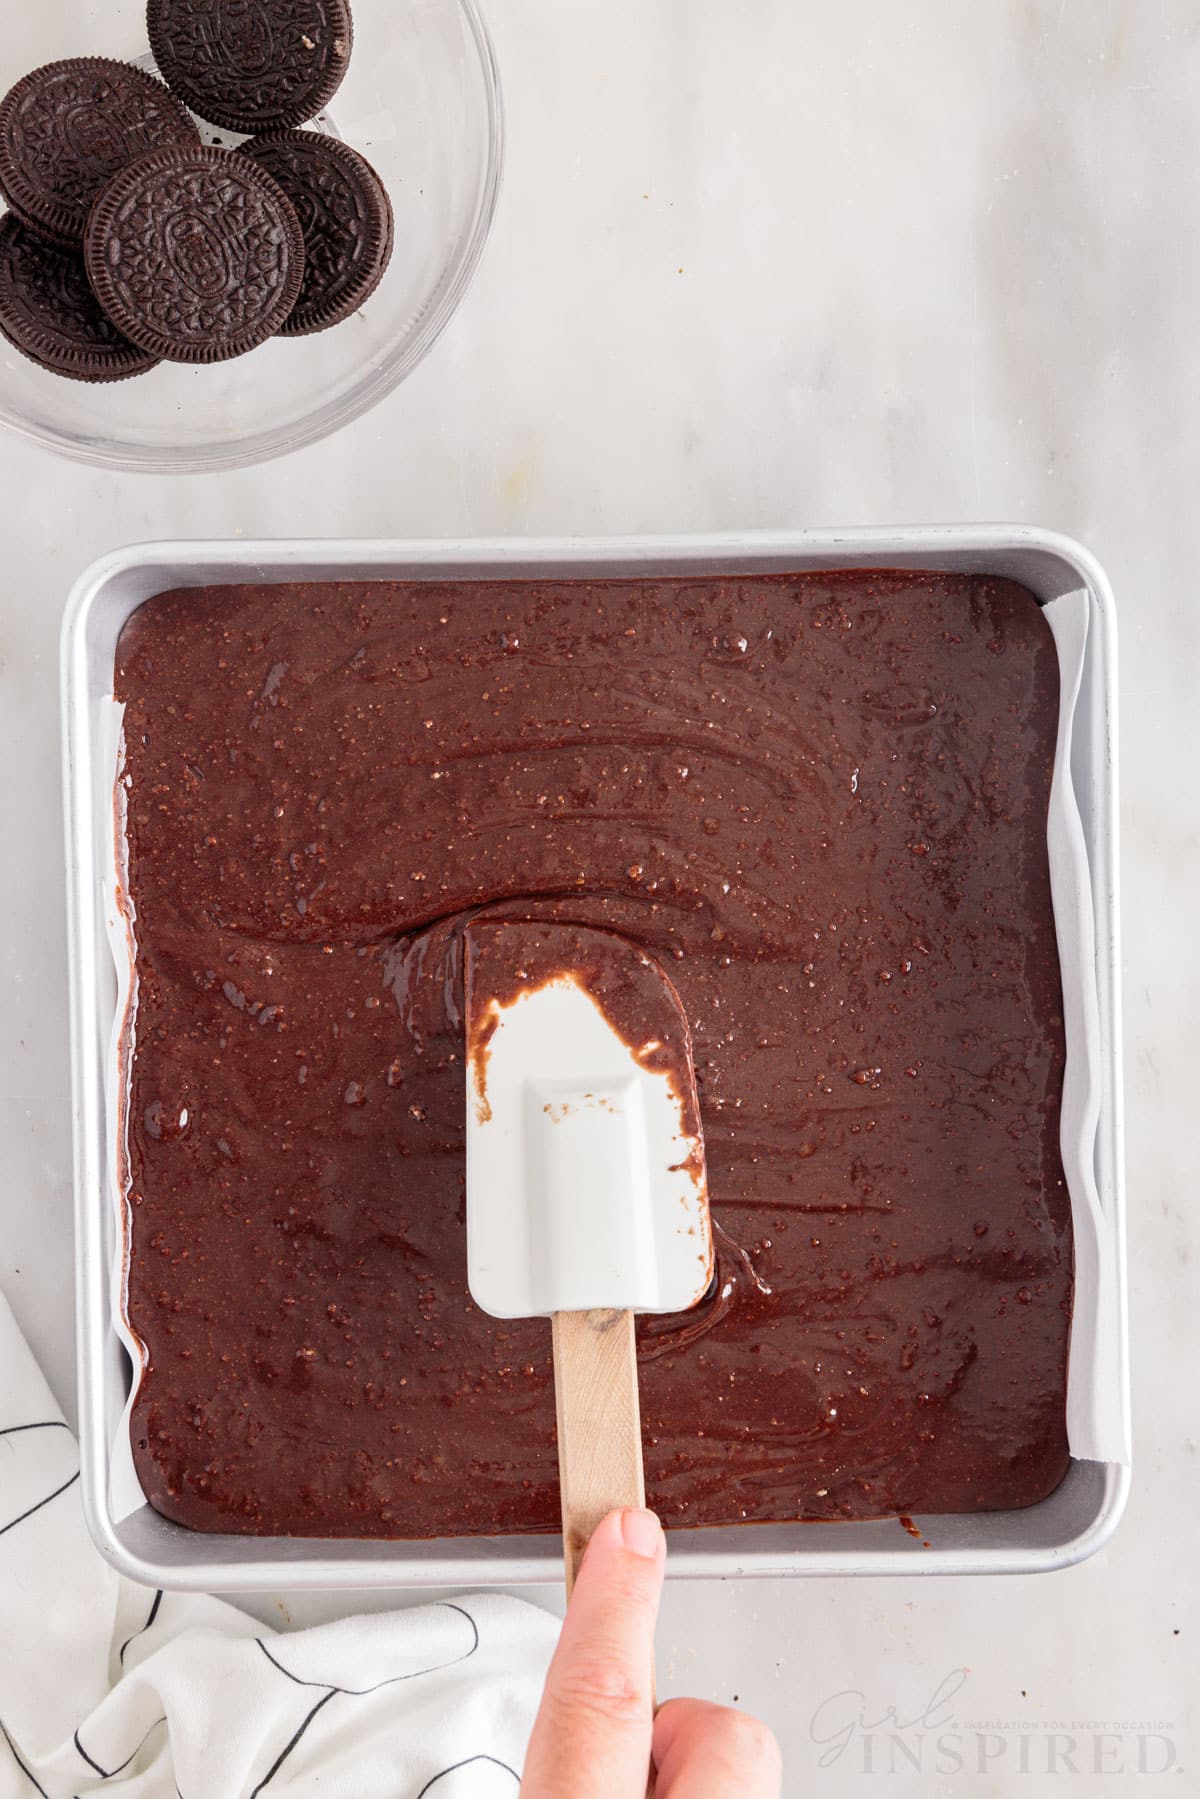 Brownie batter being smoothed with a spatula next to a bowl of Oreo's.